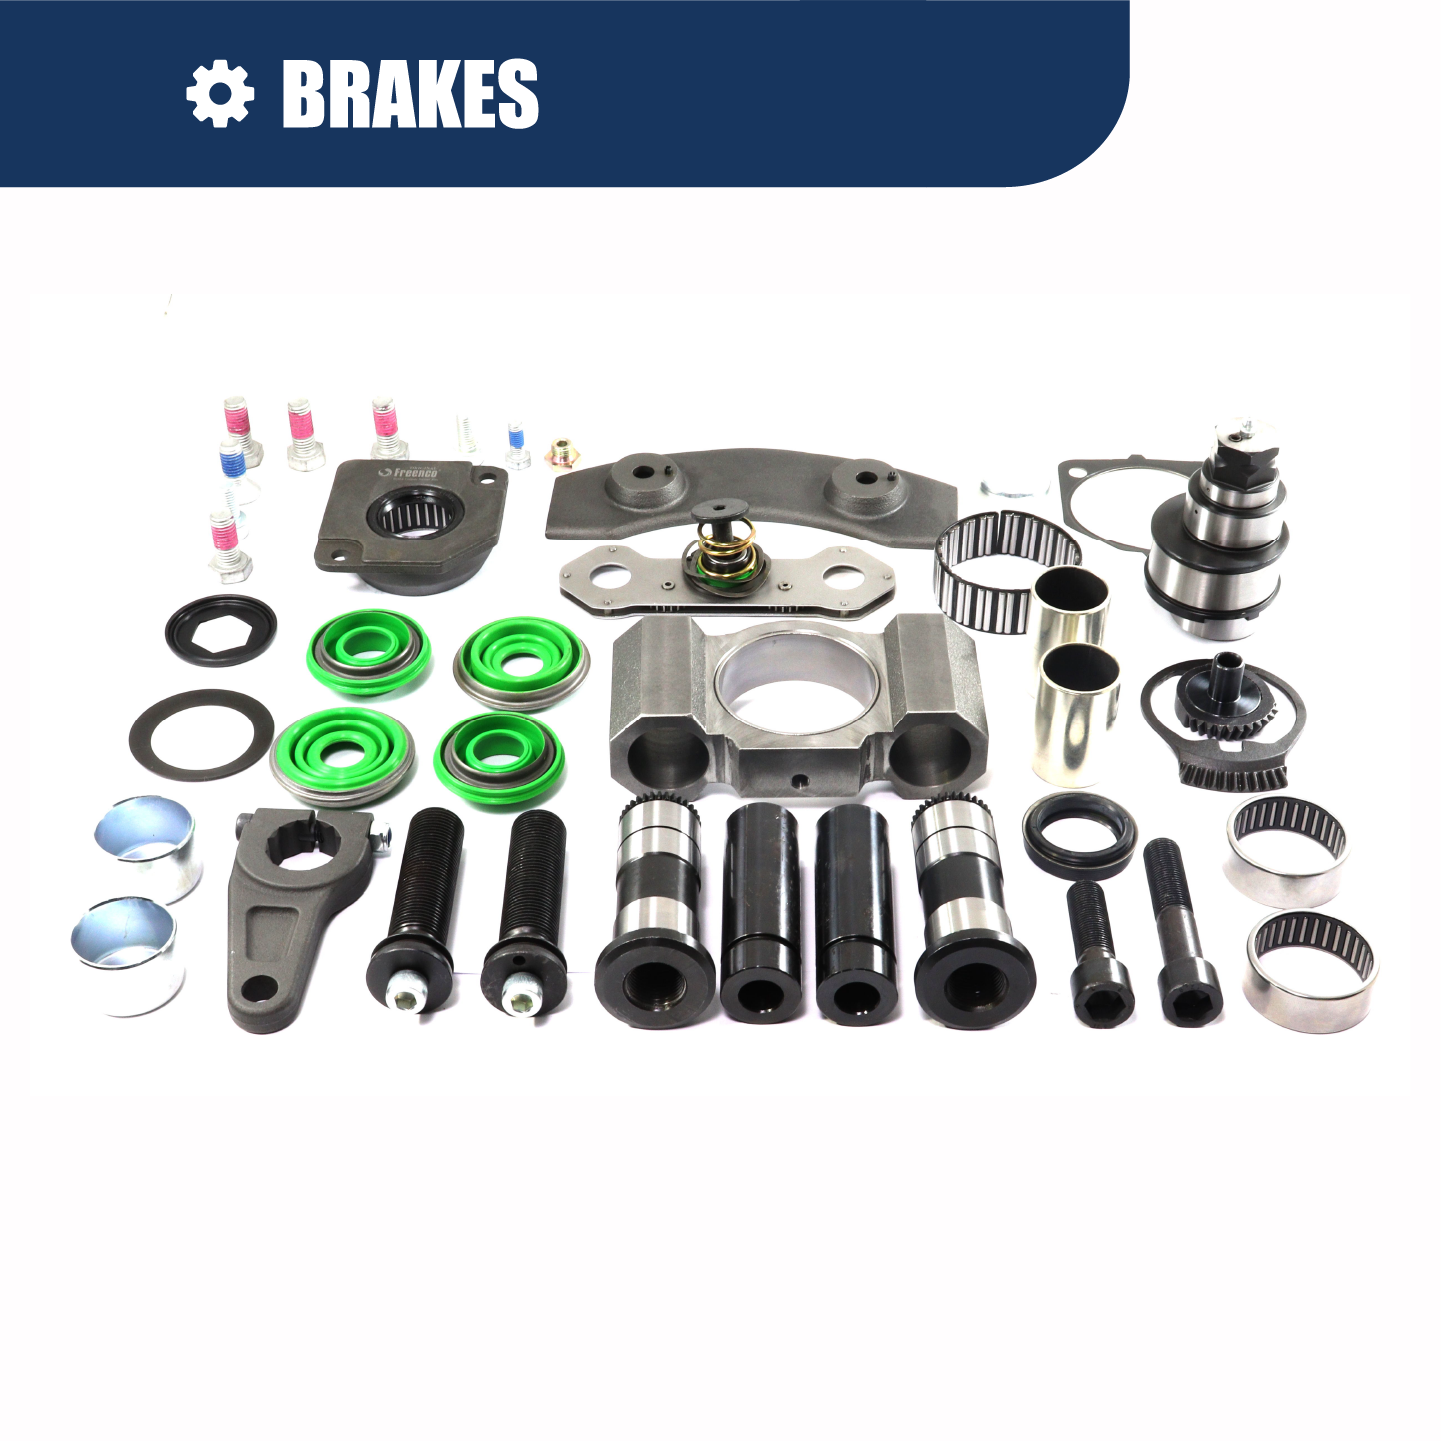 BRAKES (WITH BANNER)